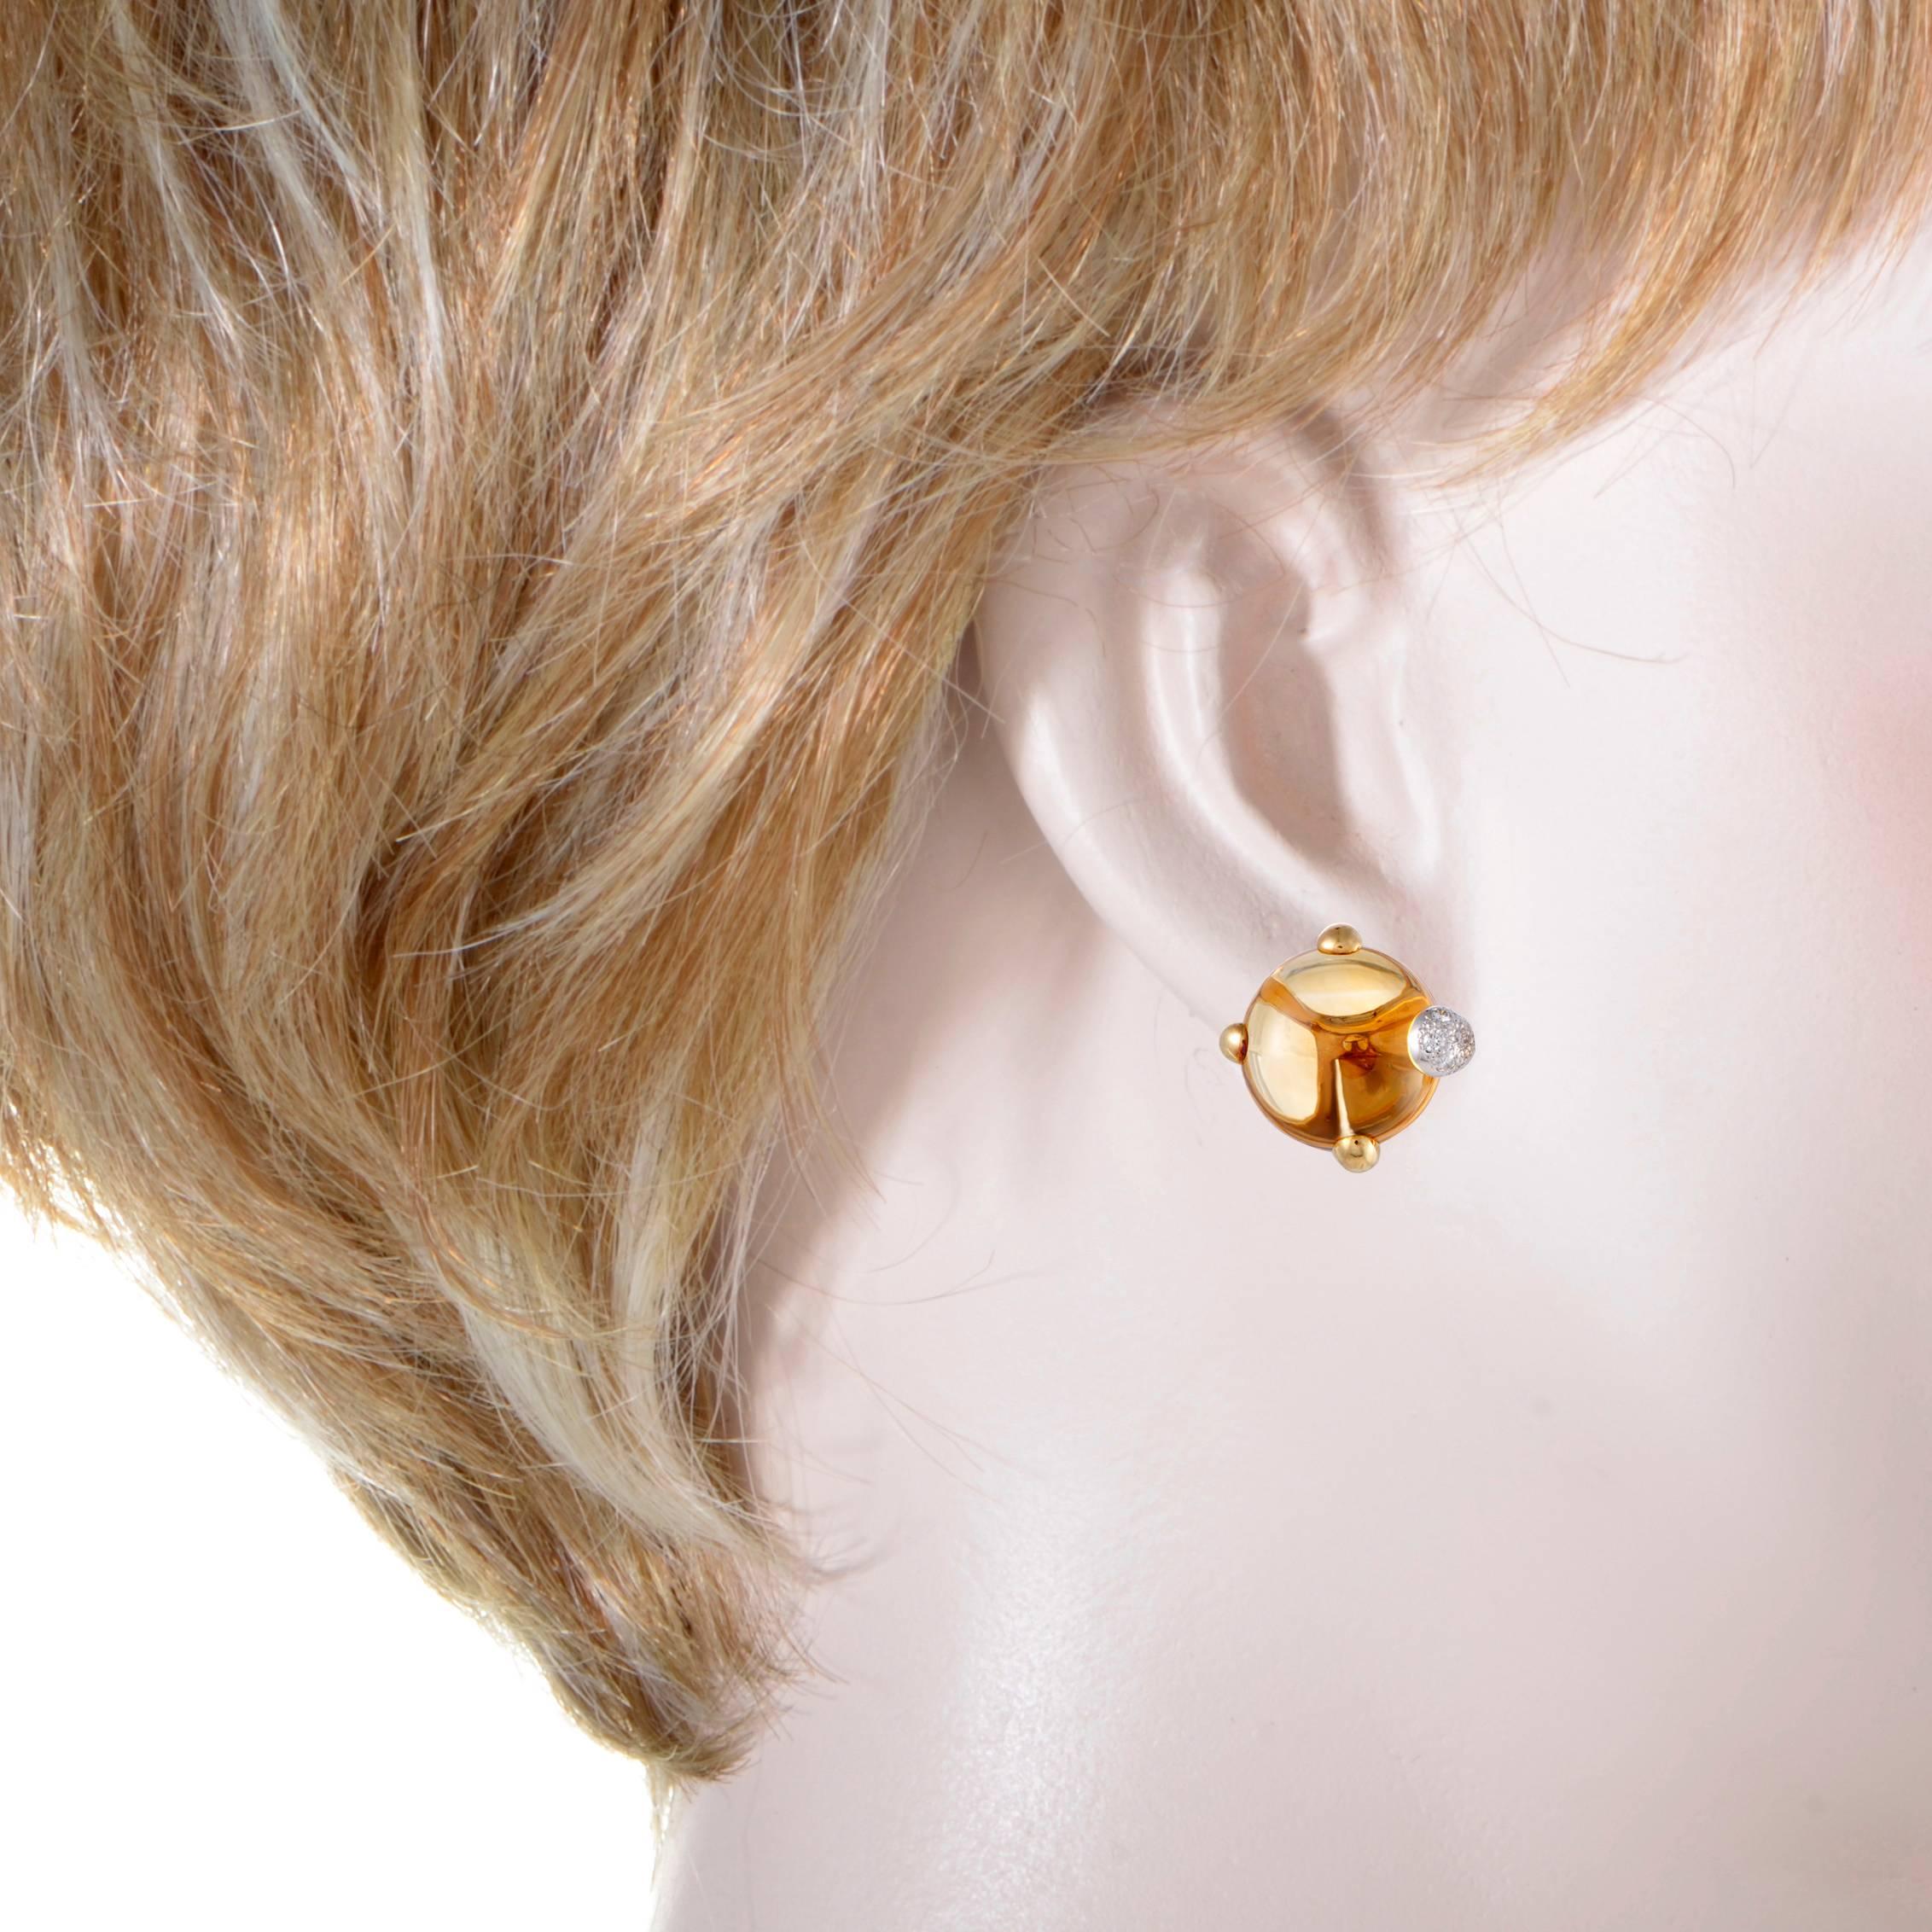 Presented within the intriguing “Griffe” collection by Pomellato, these exquisite earrings offer a look that is both fascinatingly offbeat and incredibly stylish. The pair is made of 18K yellow and white gold and set with citrines and 0.25 carats of